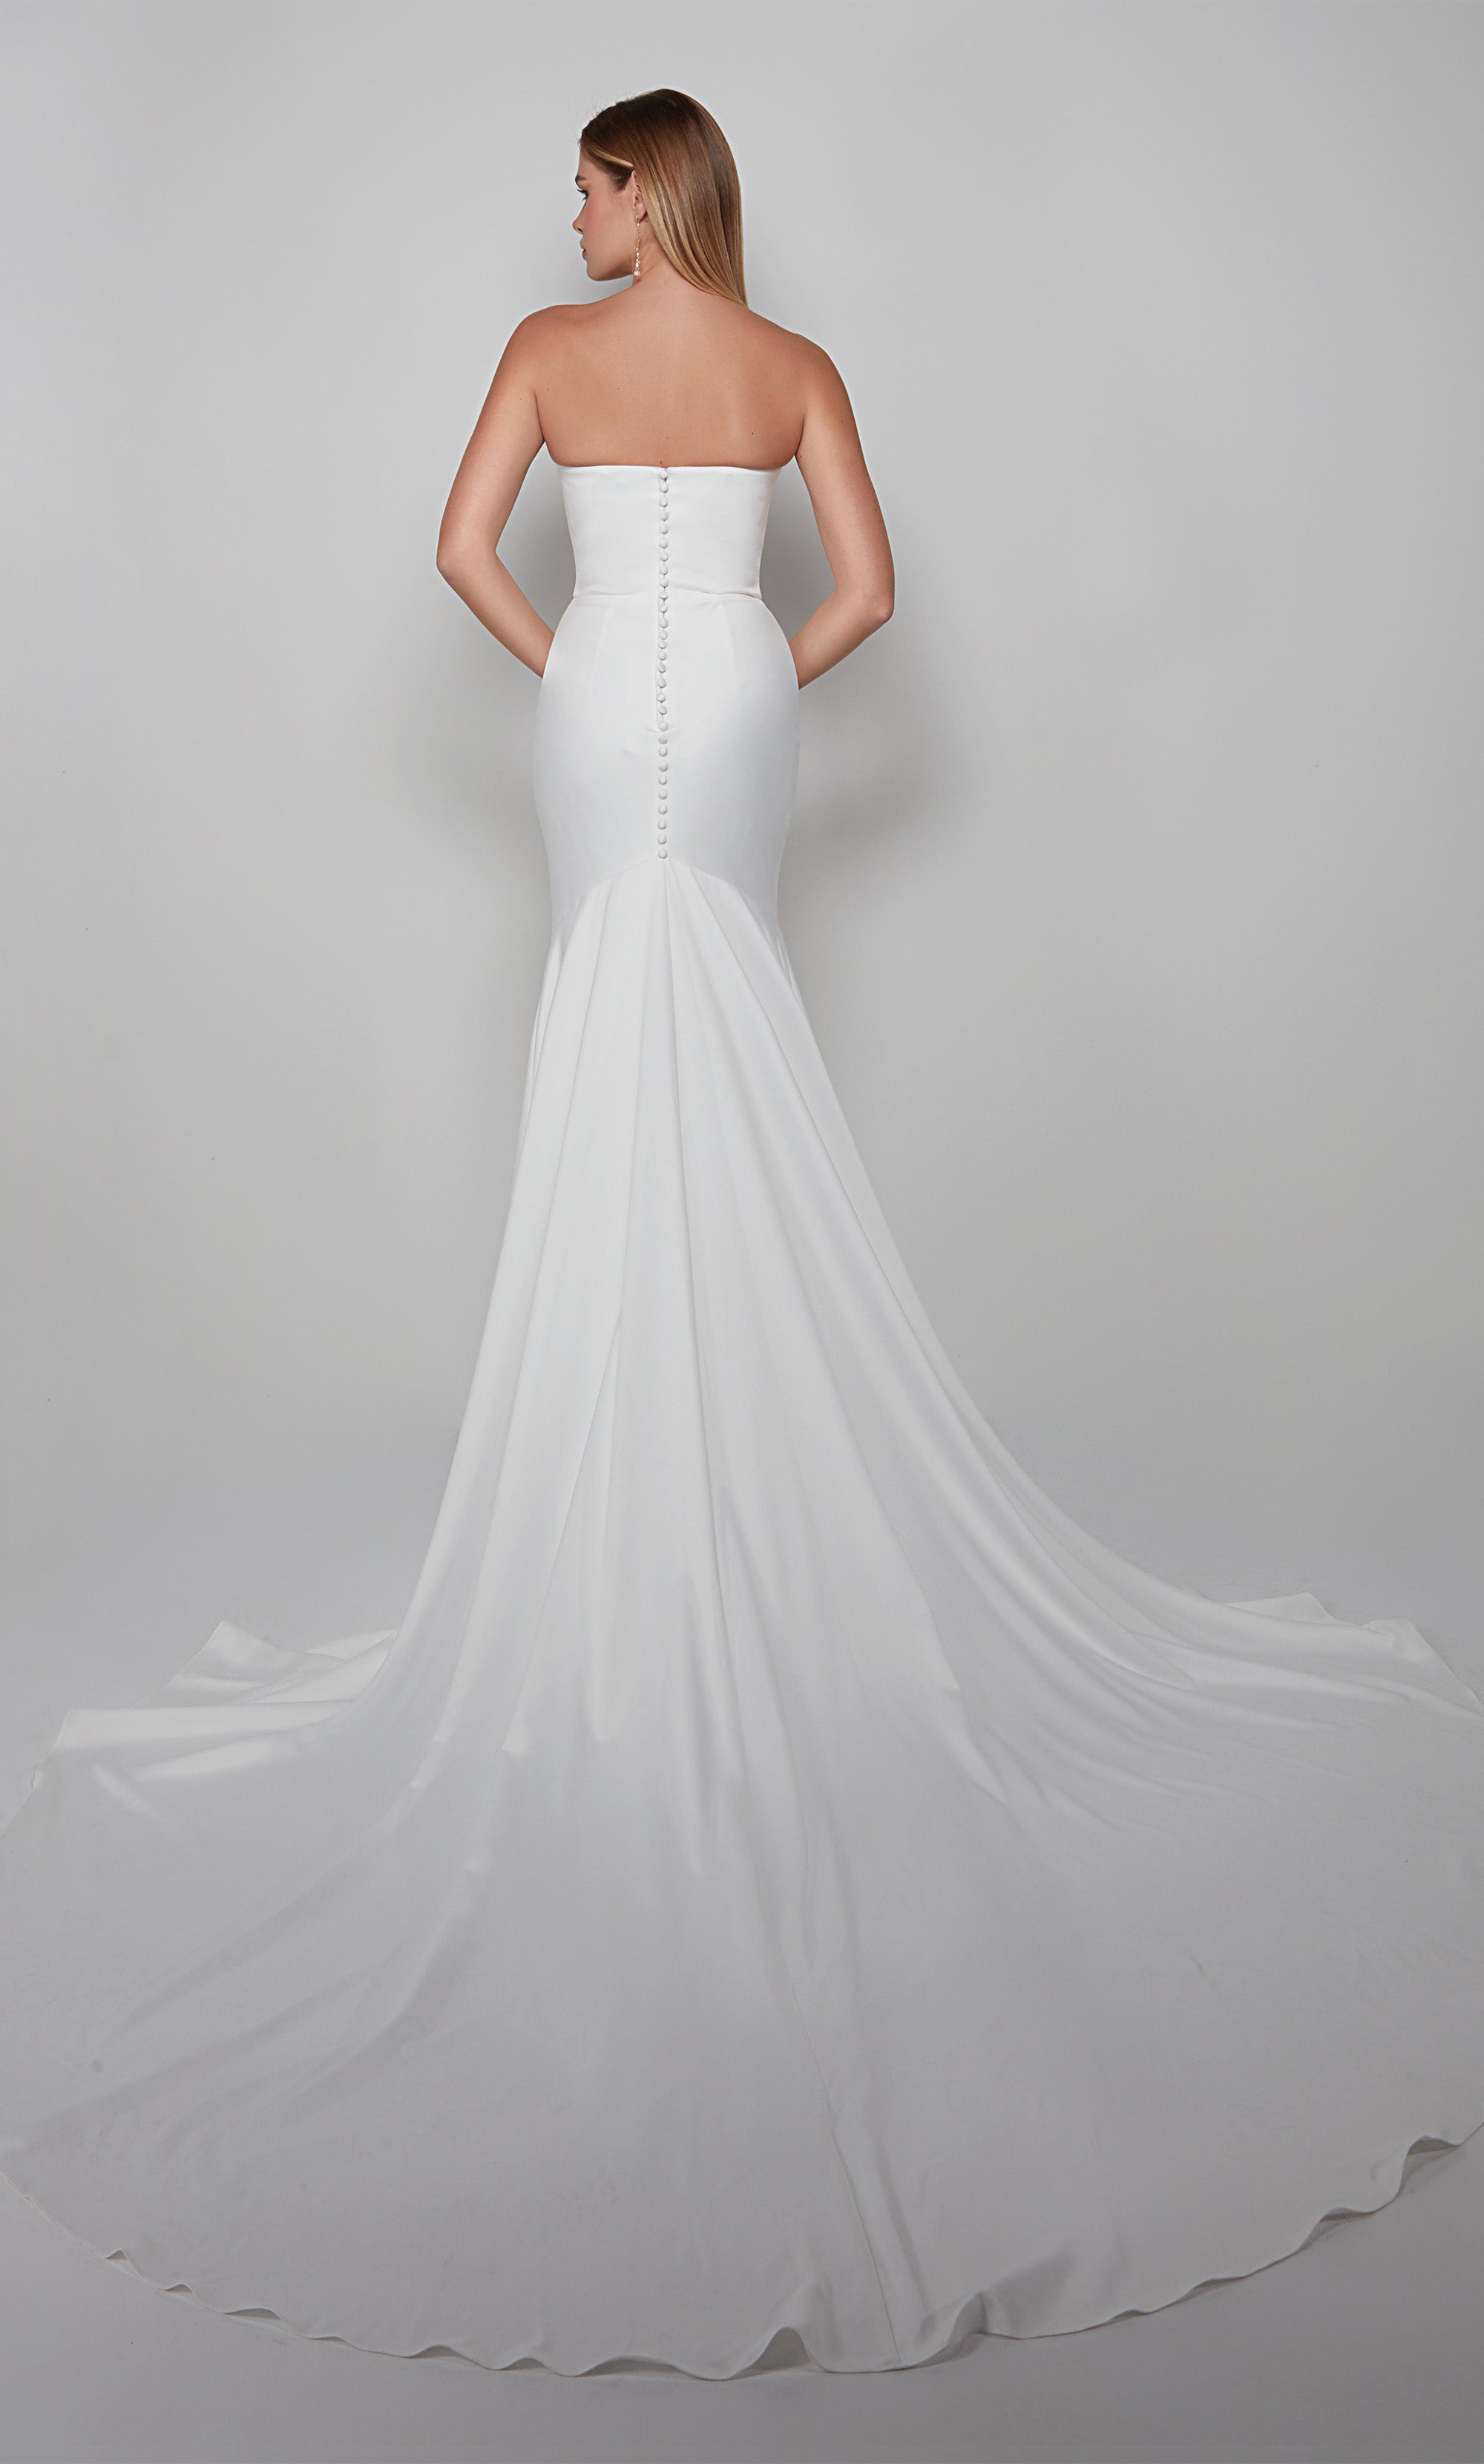 Strapless satin wedding dress cut in a fit and flare silhouette in diamond white color. Color-SWATCH_7060__DIAMOND-WHITE